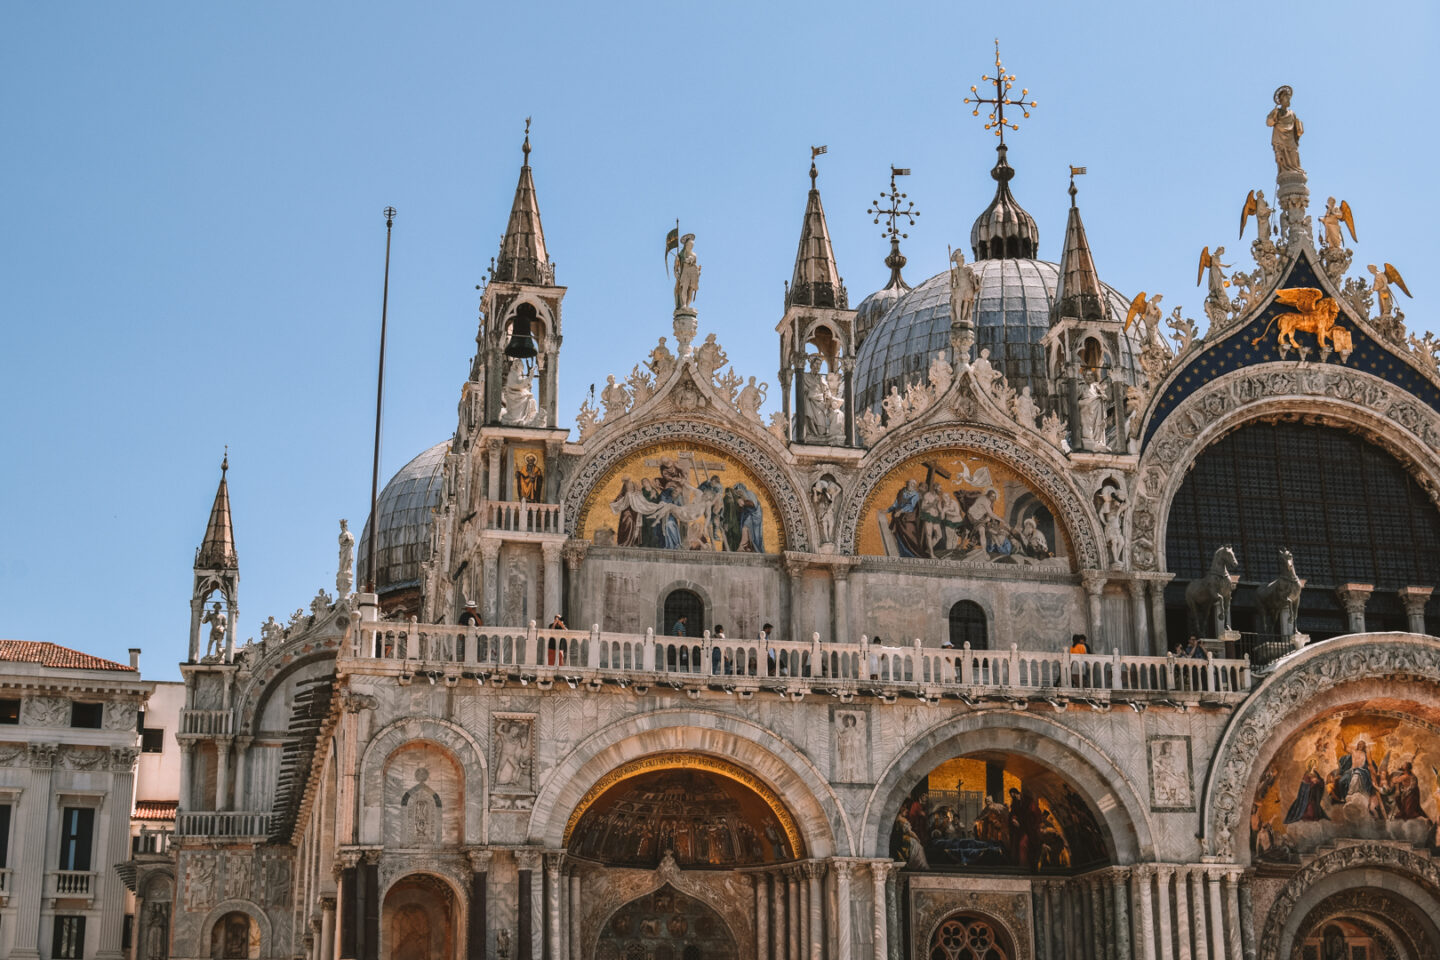 Visit St. Mark's Square (Piazza San Marco) and St. Mark's Basilica